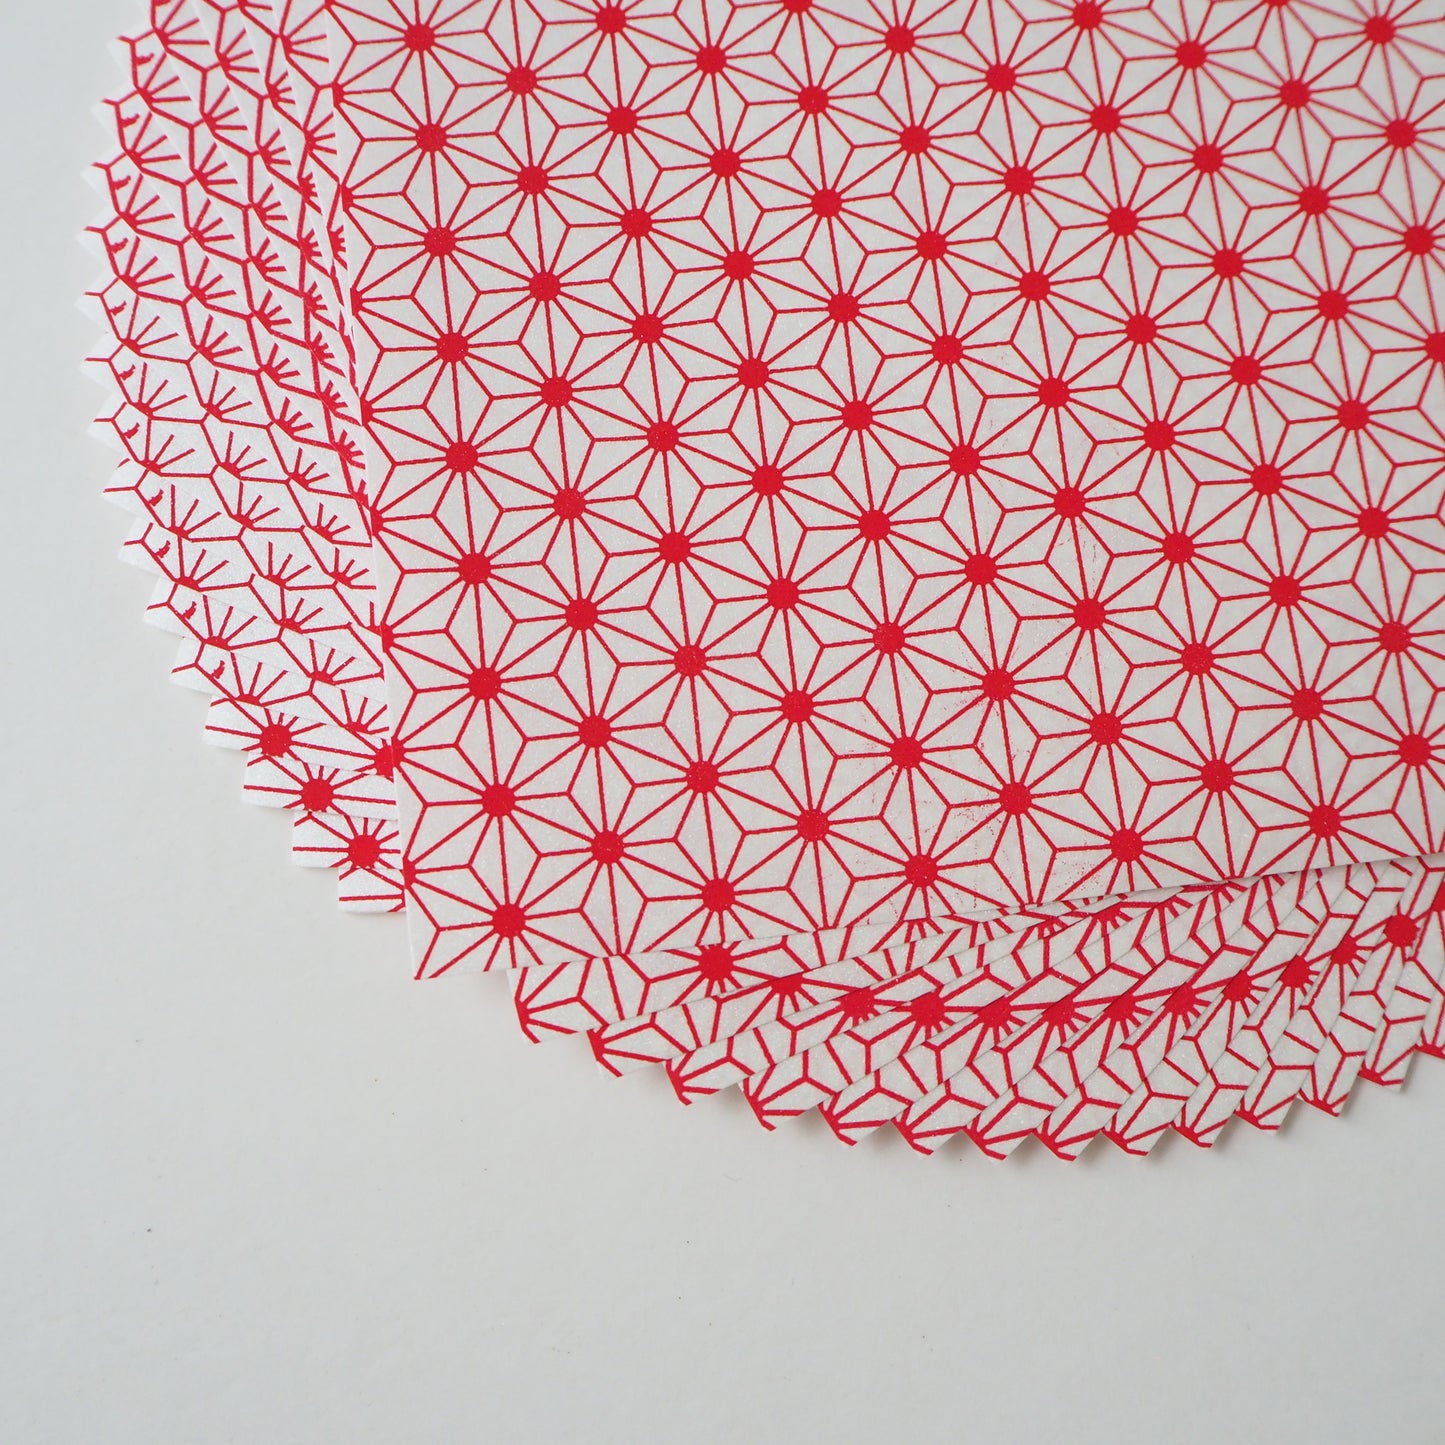 Pack of 20 Sheets 14x14cm Yuzen Washi Origami Paper HZ-454 - Red & Silver White Hemp Leaf